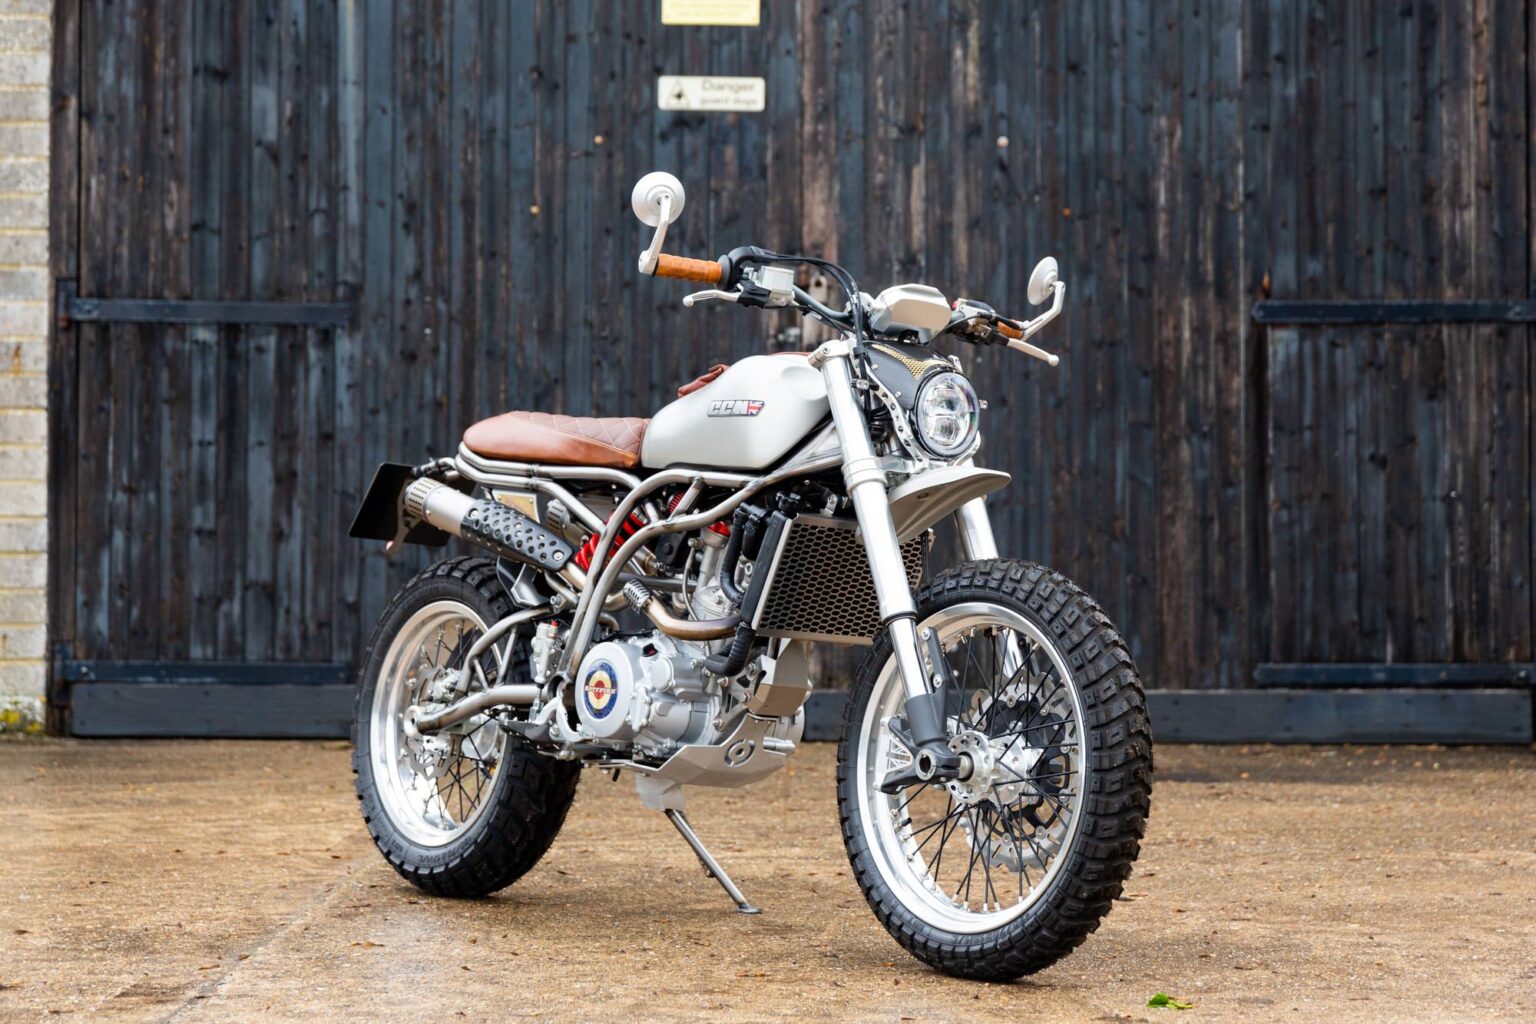 CCM Spitfire Scrambler – A Rare British Production Motorcycle – 1 Of